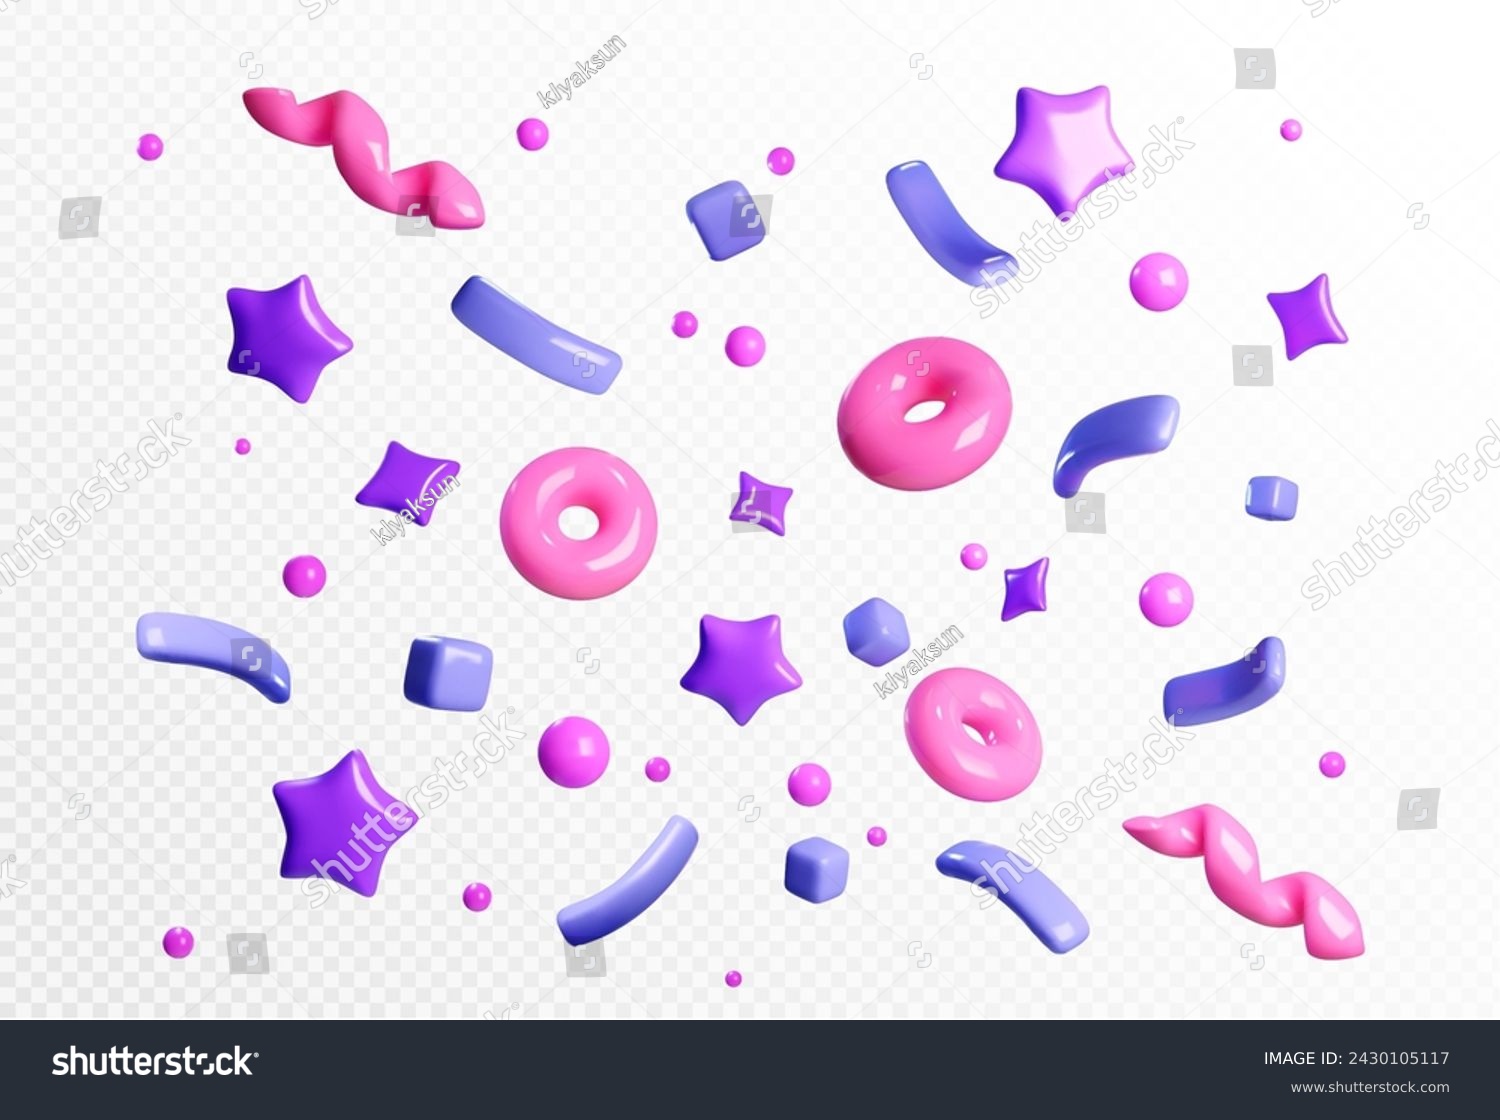 Party firecracker confetti 3d vector icon. Birthday or carnival firework or popper paper serpentine, star and elements for congratulation design. Winner and holiday celebration cracker flying shapes. #2430105117